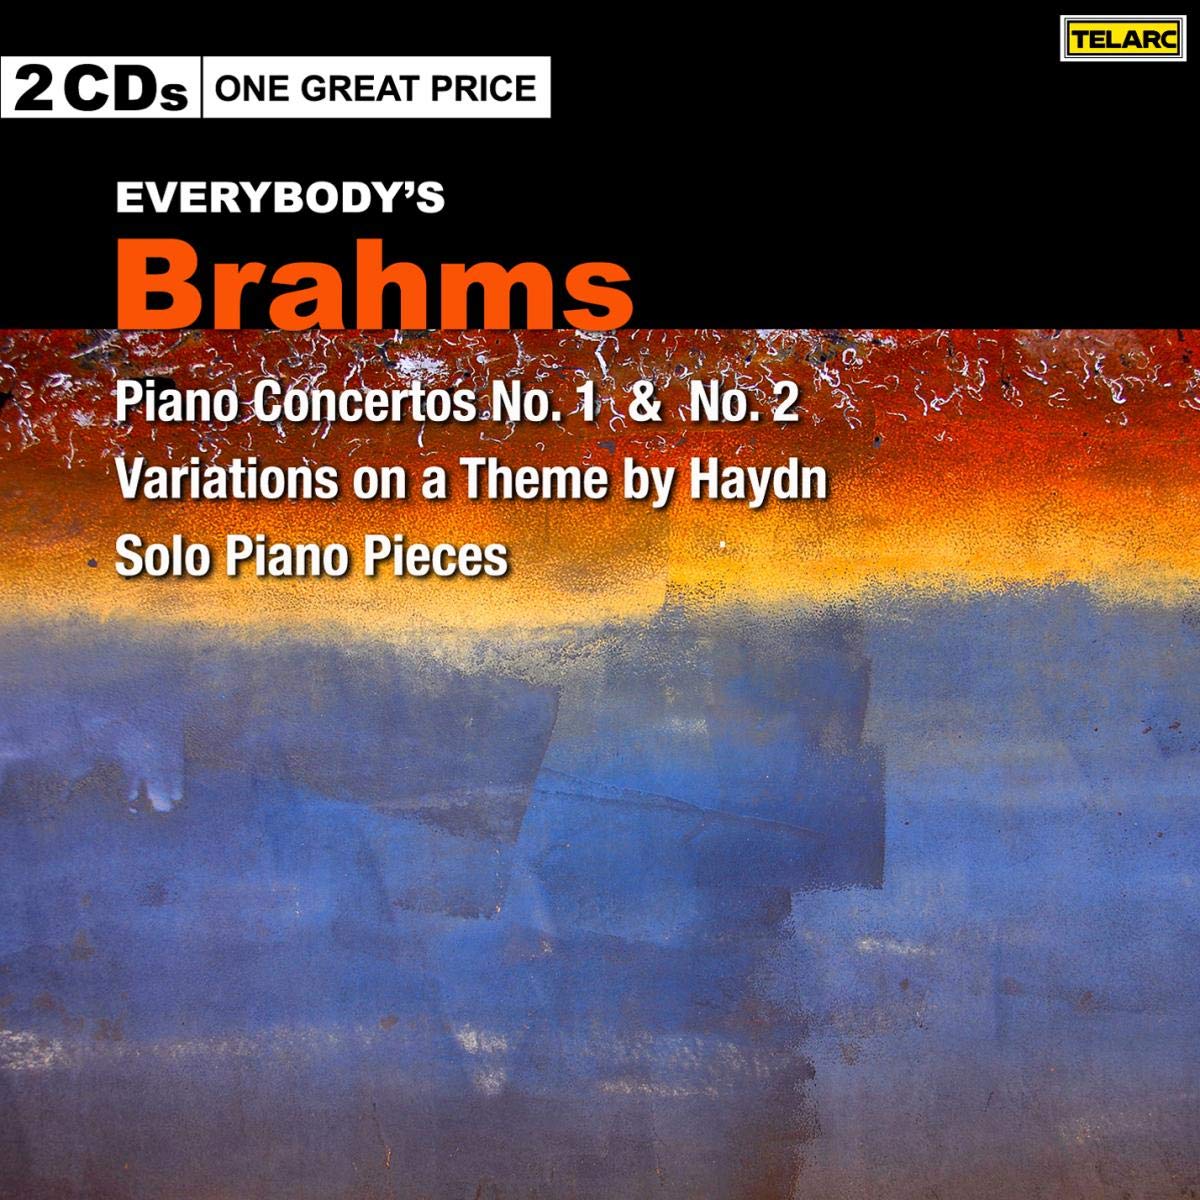 BRAHMS: Piano Concertos Nos. 1 & 2; Variations on a Theme by Haydn, Solo Piano Works - Previn, Gutierrez, Lang, Royal Philharmonic (2 CDs)